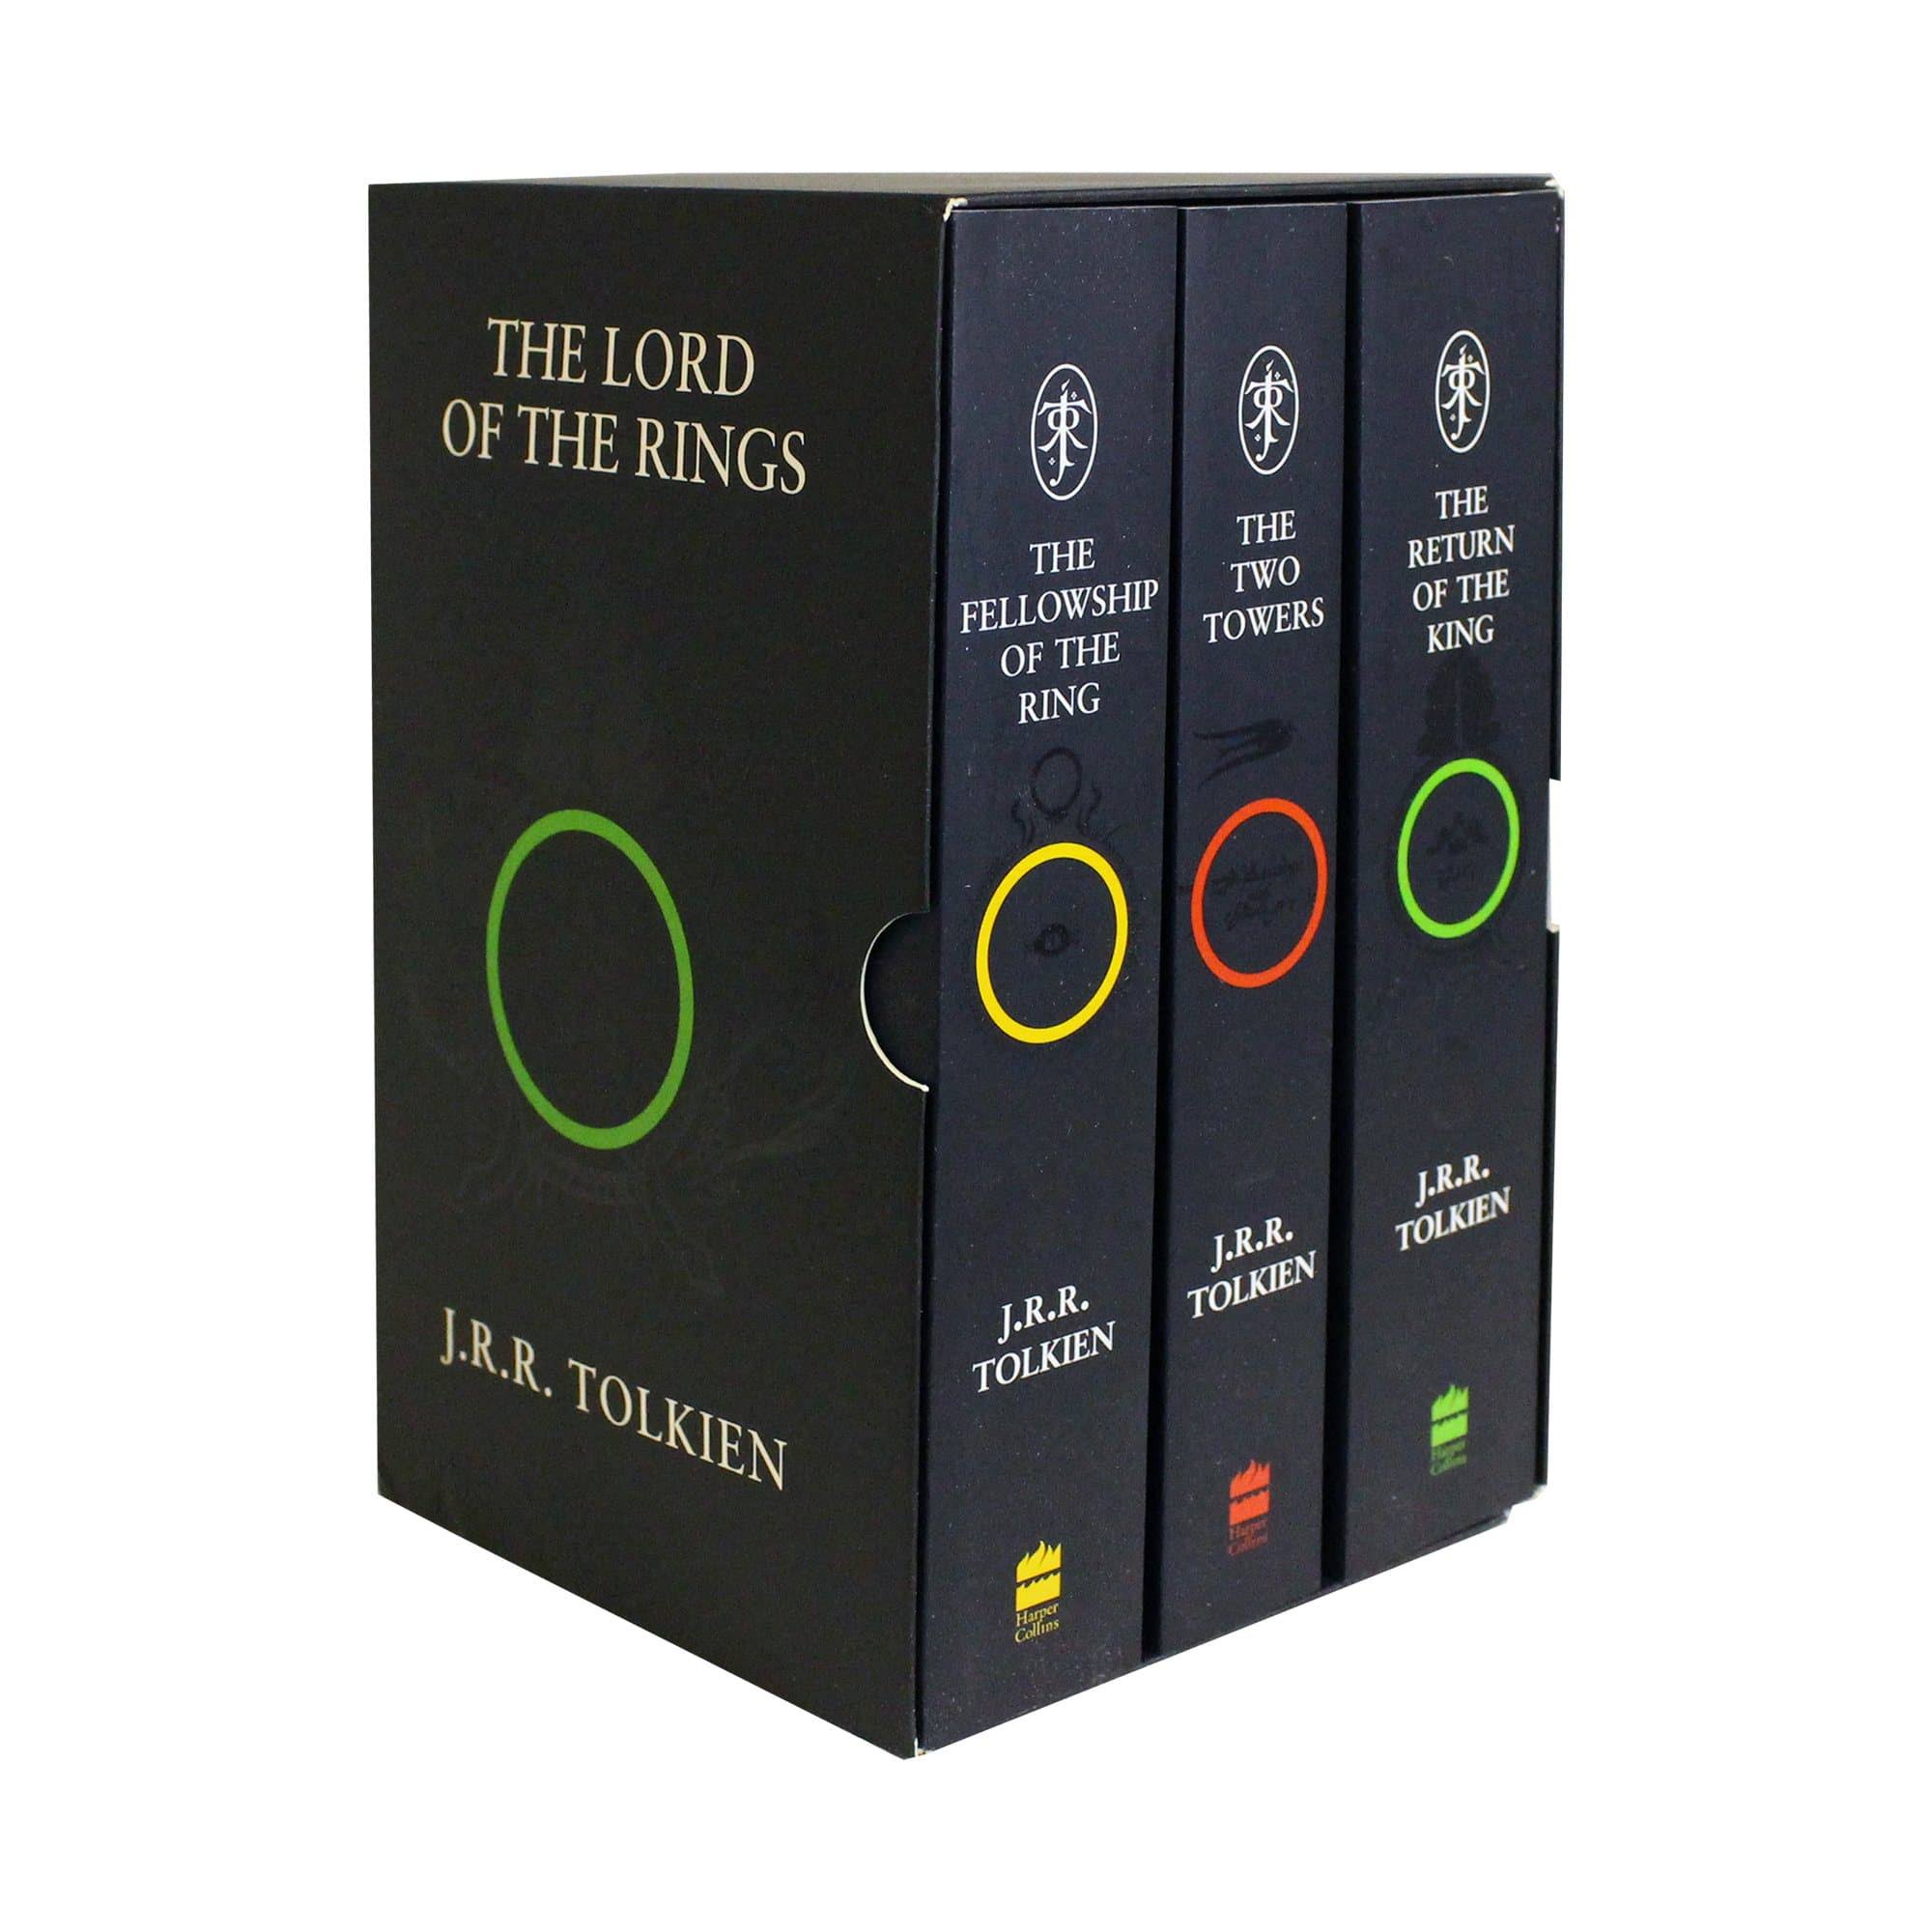 The Lord of the Rings 3 Book Box Set - JRR Tolkien